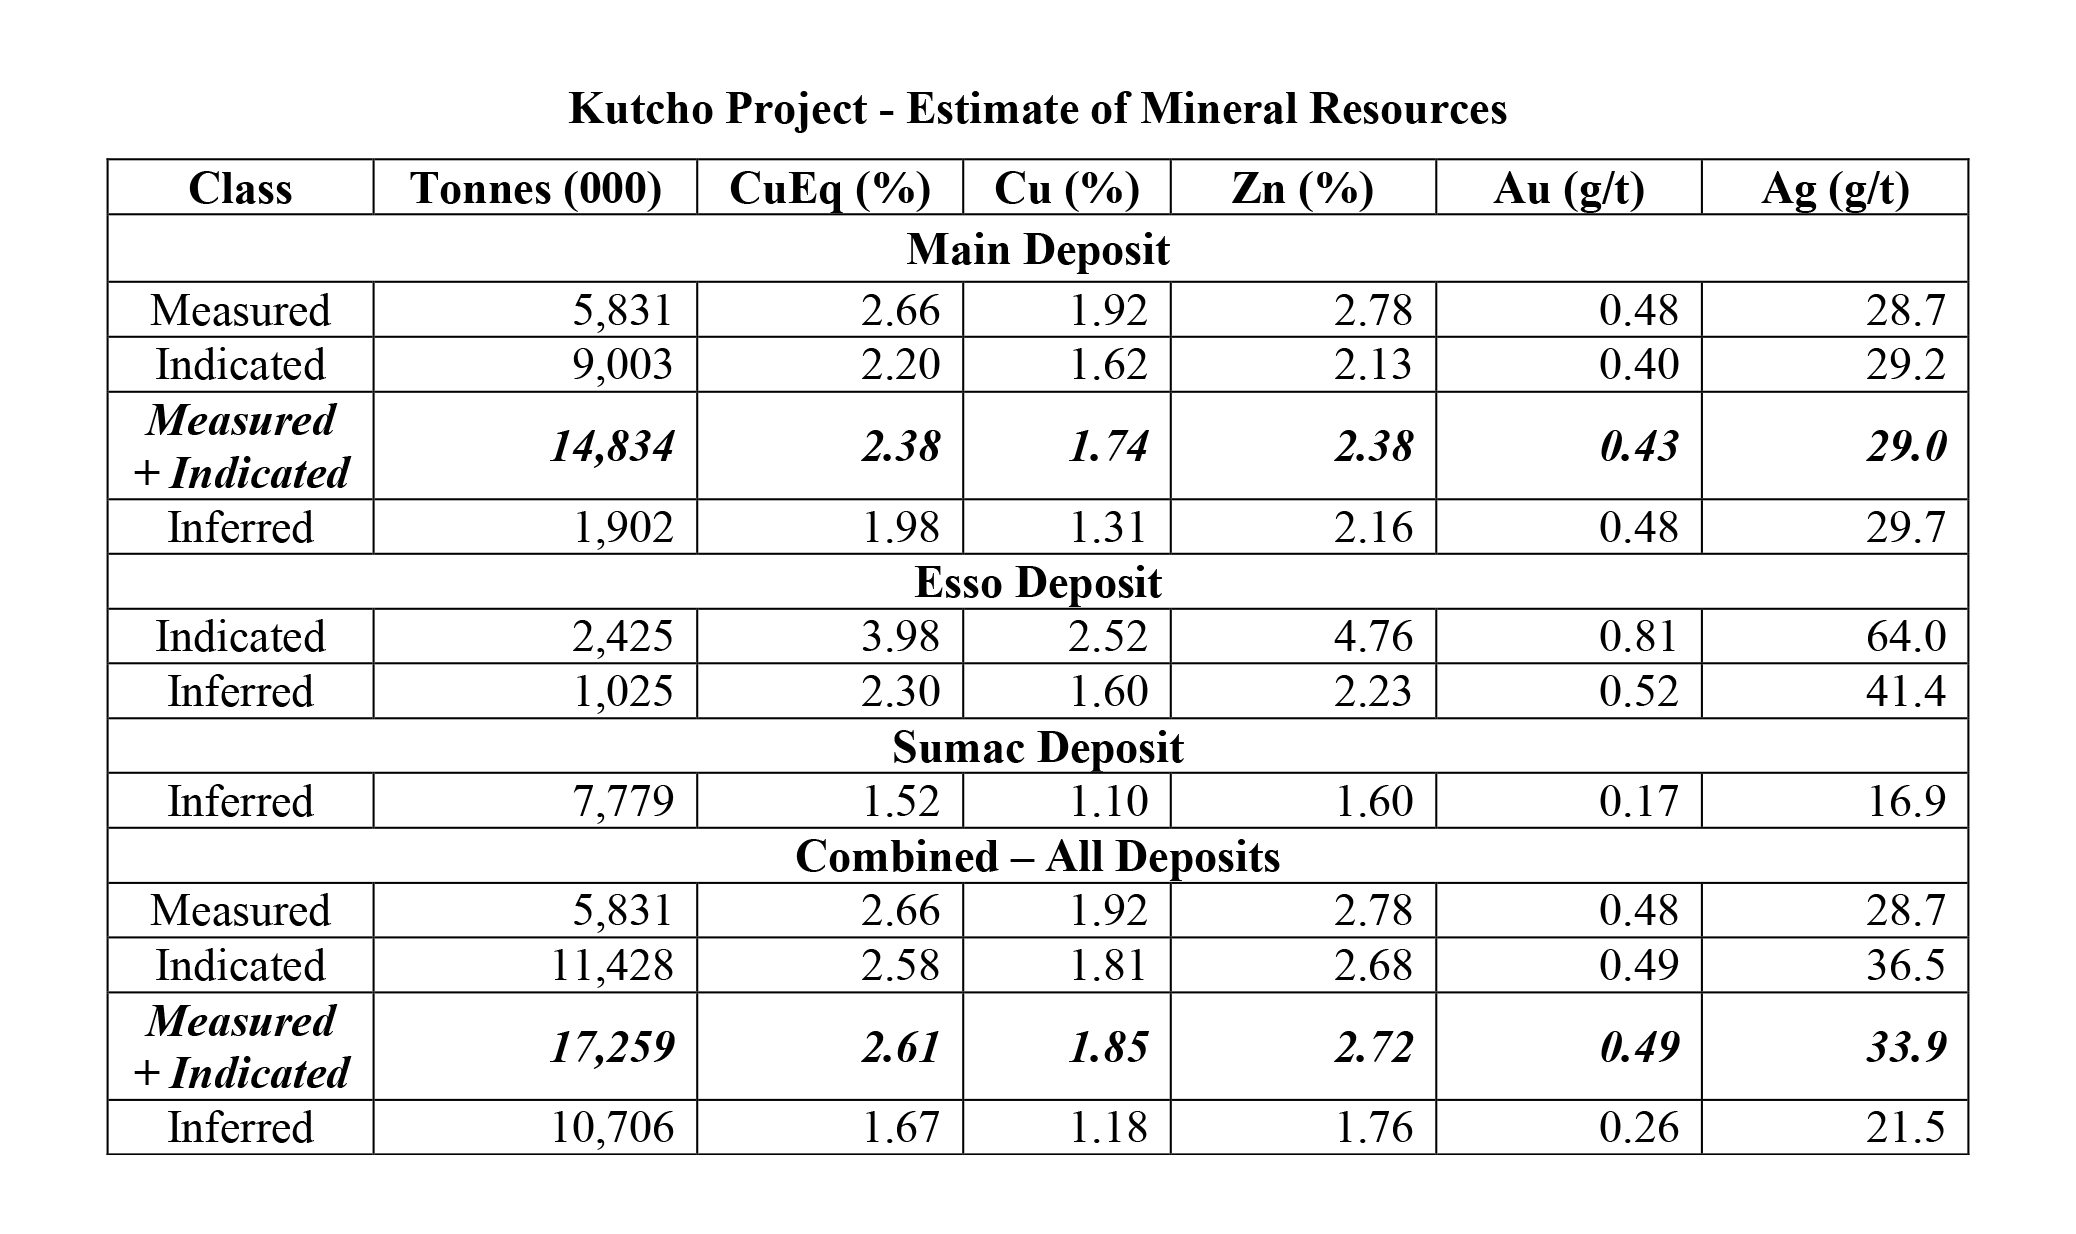 Kutcho Project - Estimate of Mineral Resources